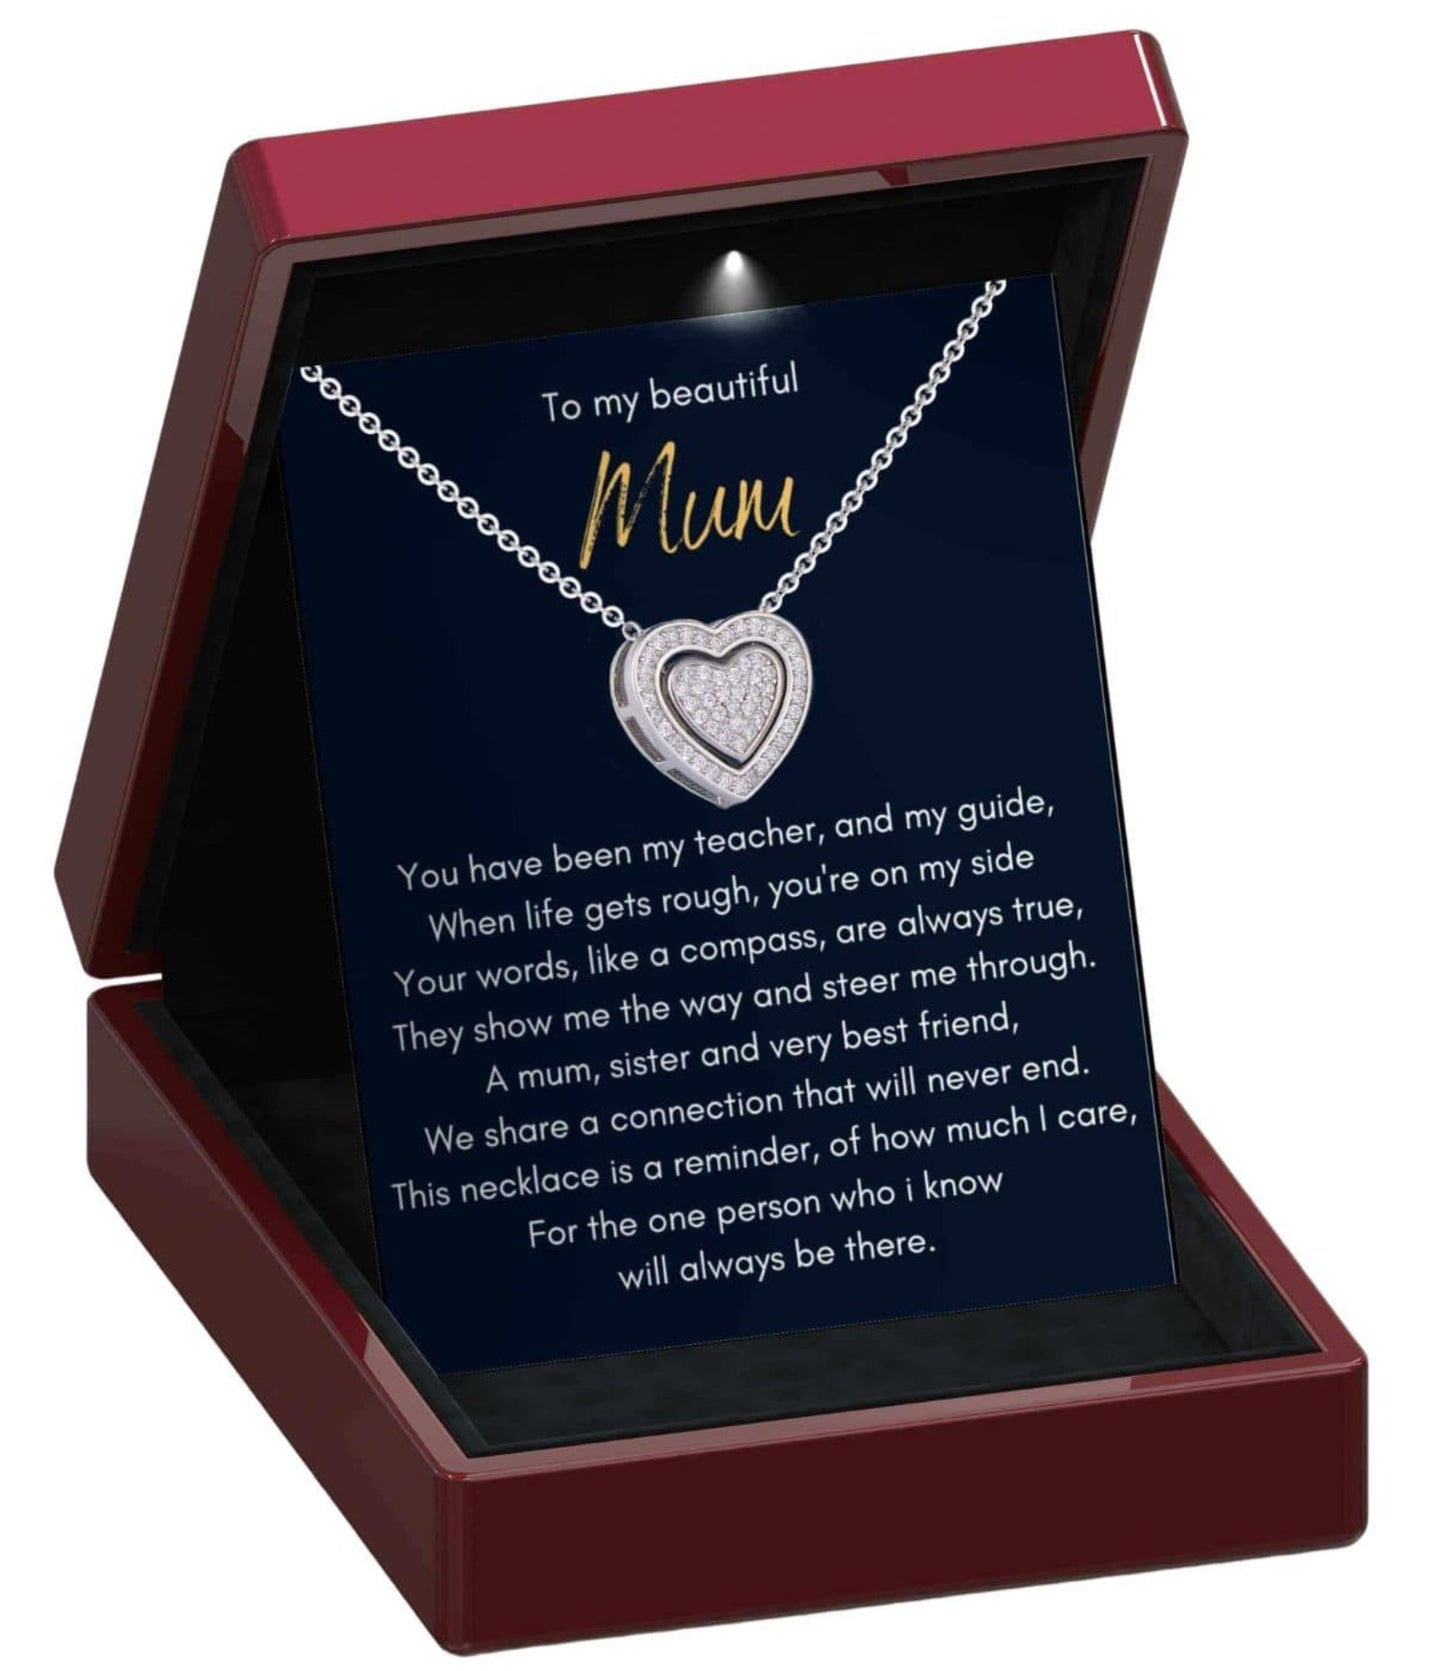 Mum, Sister & Best Friend 3 in 1 Necklace -  Sterling Silver Trinity Necklace - Mum24